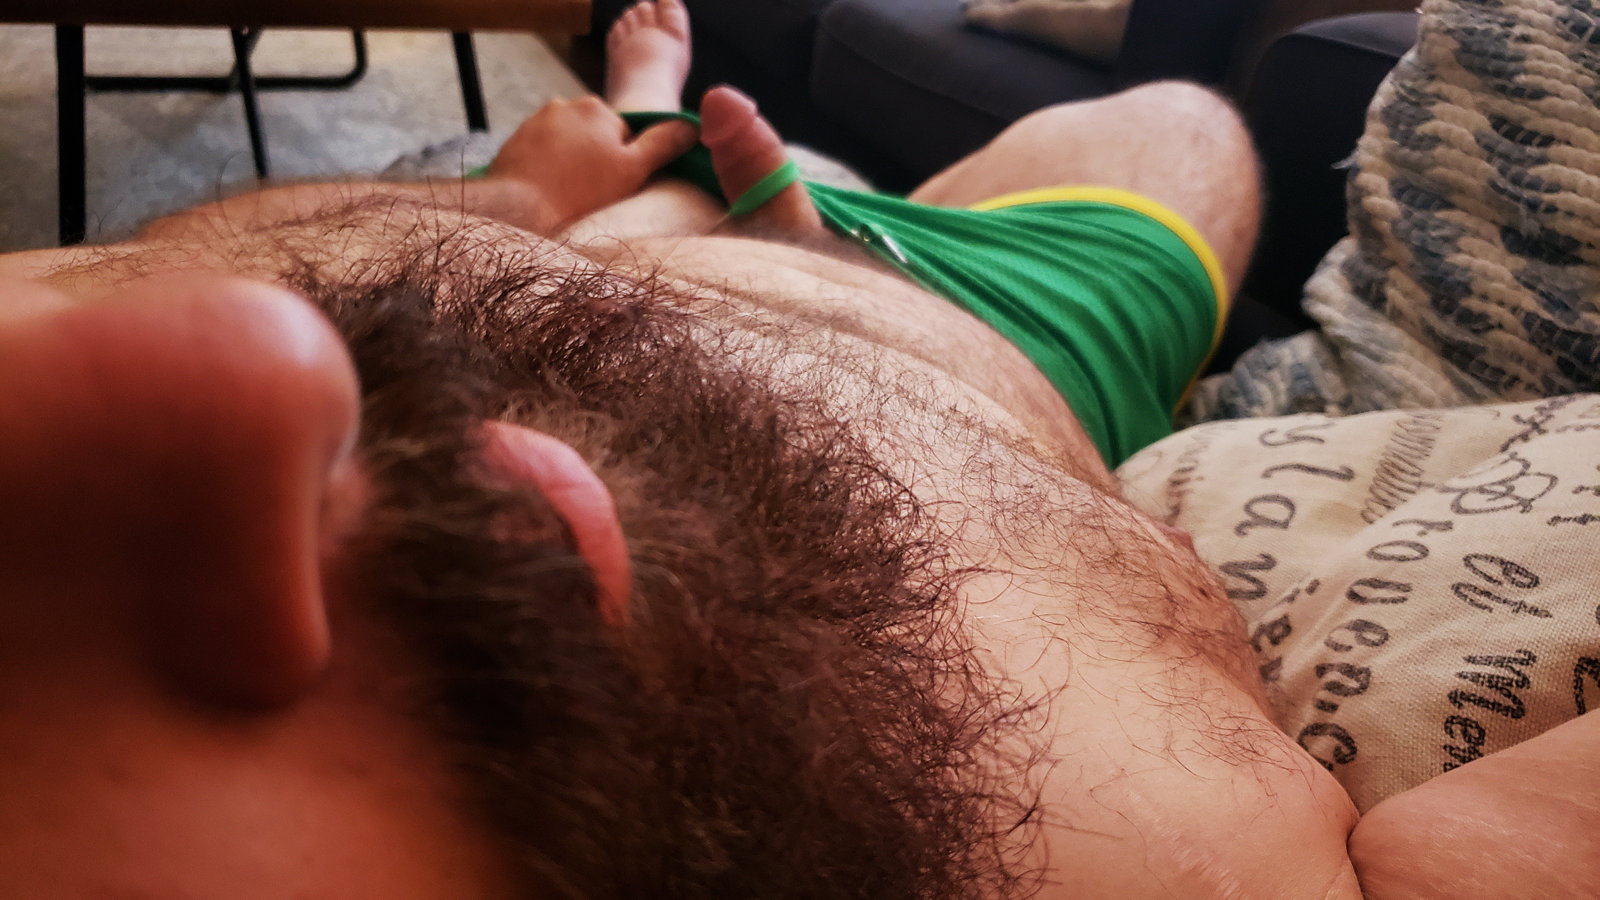 Photo by Nutterbutter with the username @NuttsNButts,  August 8, 2020 at 11:24 AM. The post is about the topic GayTumblr and the text says '#beards #bears #hairycock #hairydady'